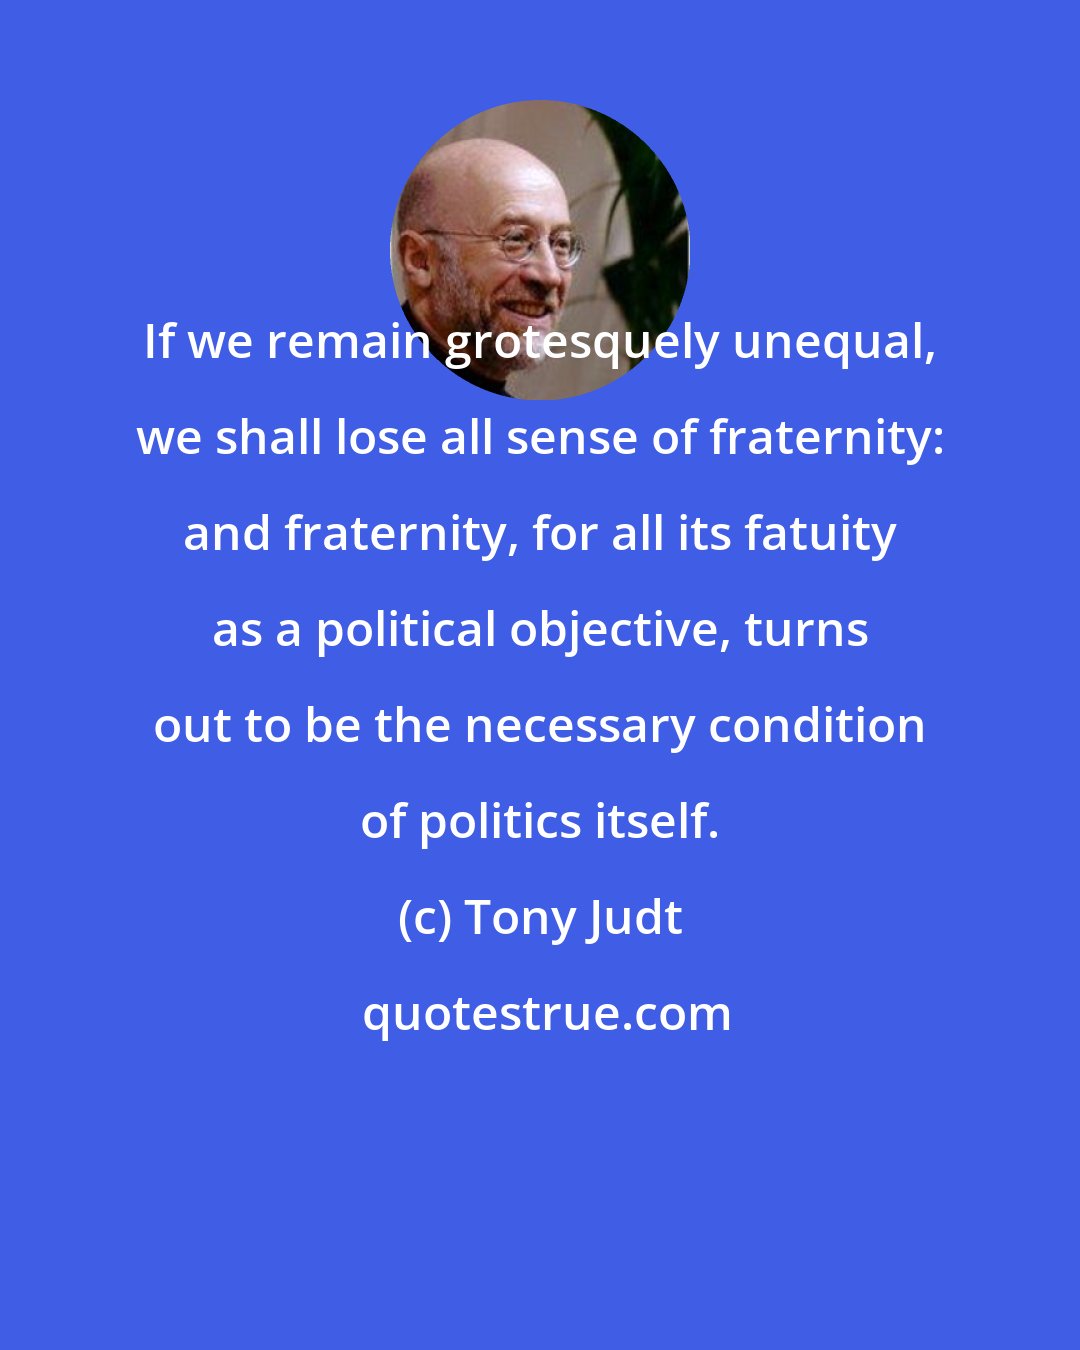 Tony Judt: If we remain grotesquely unequal, we shall lose all sense of fraternity: and fraternity, for all its fatuity as a political objective, turns out to be the necessary condition of politics itself.